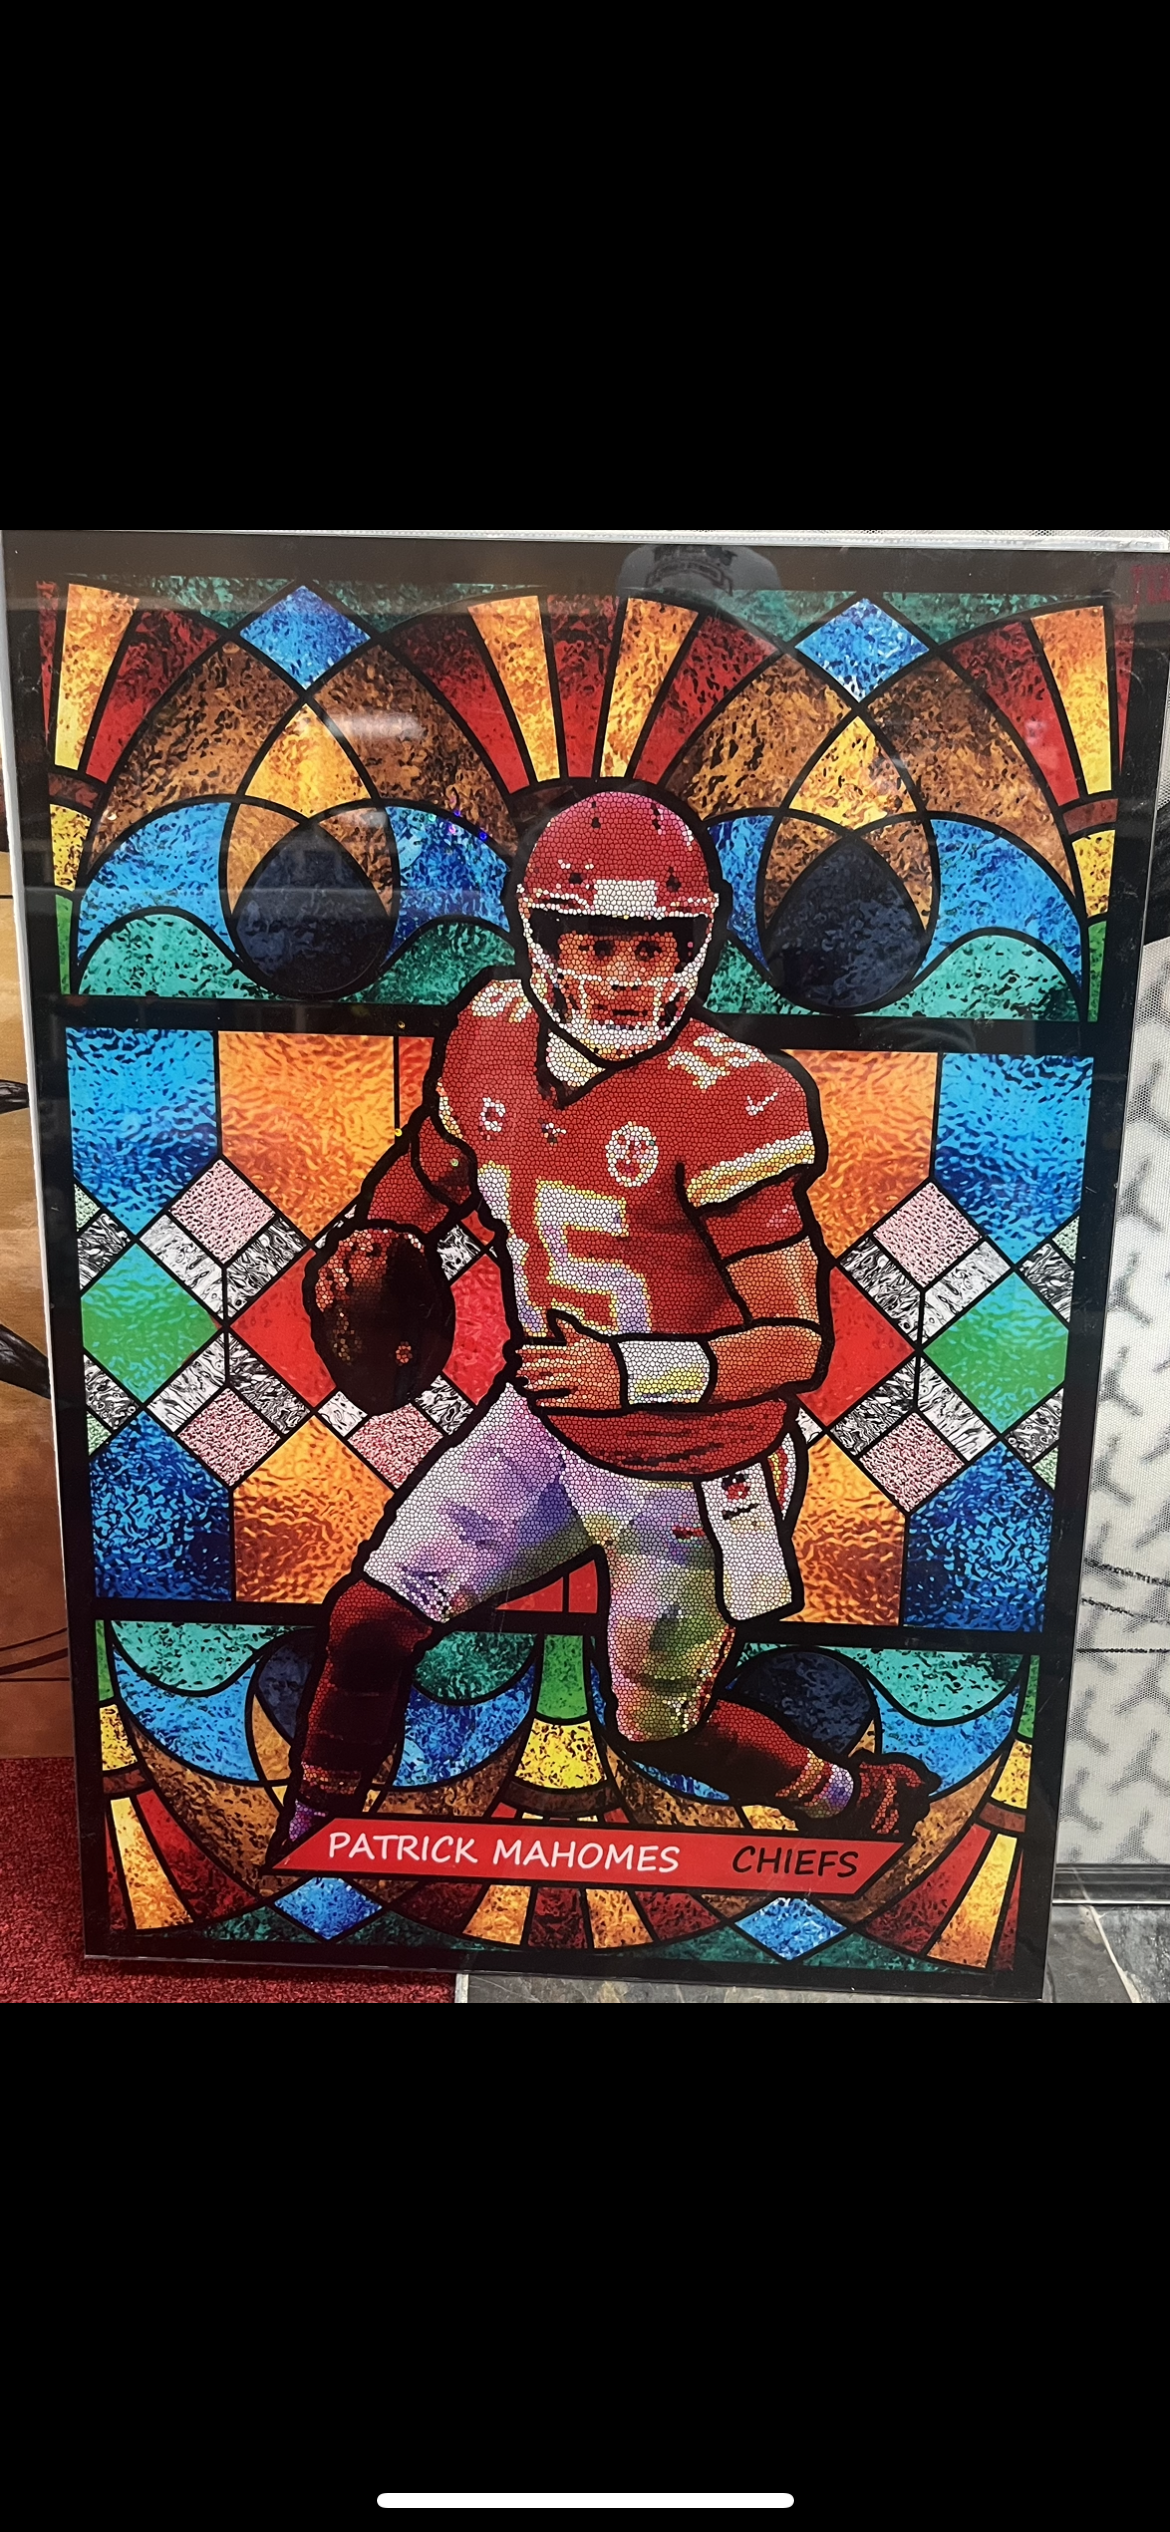 Patrick Mahomes Stained Glass Mosaic Print